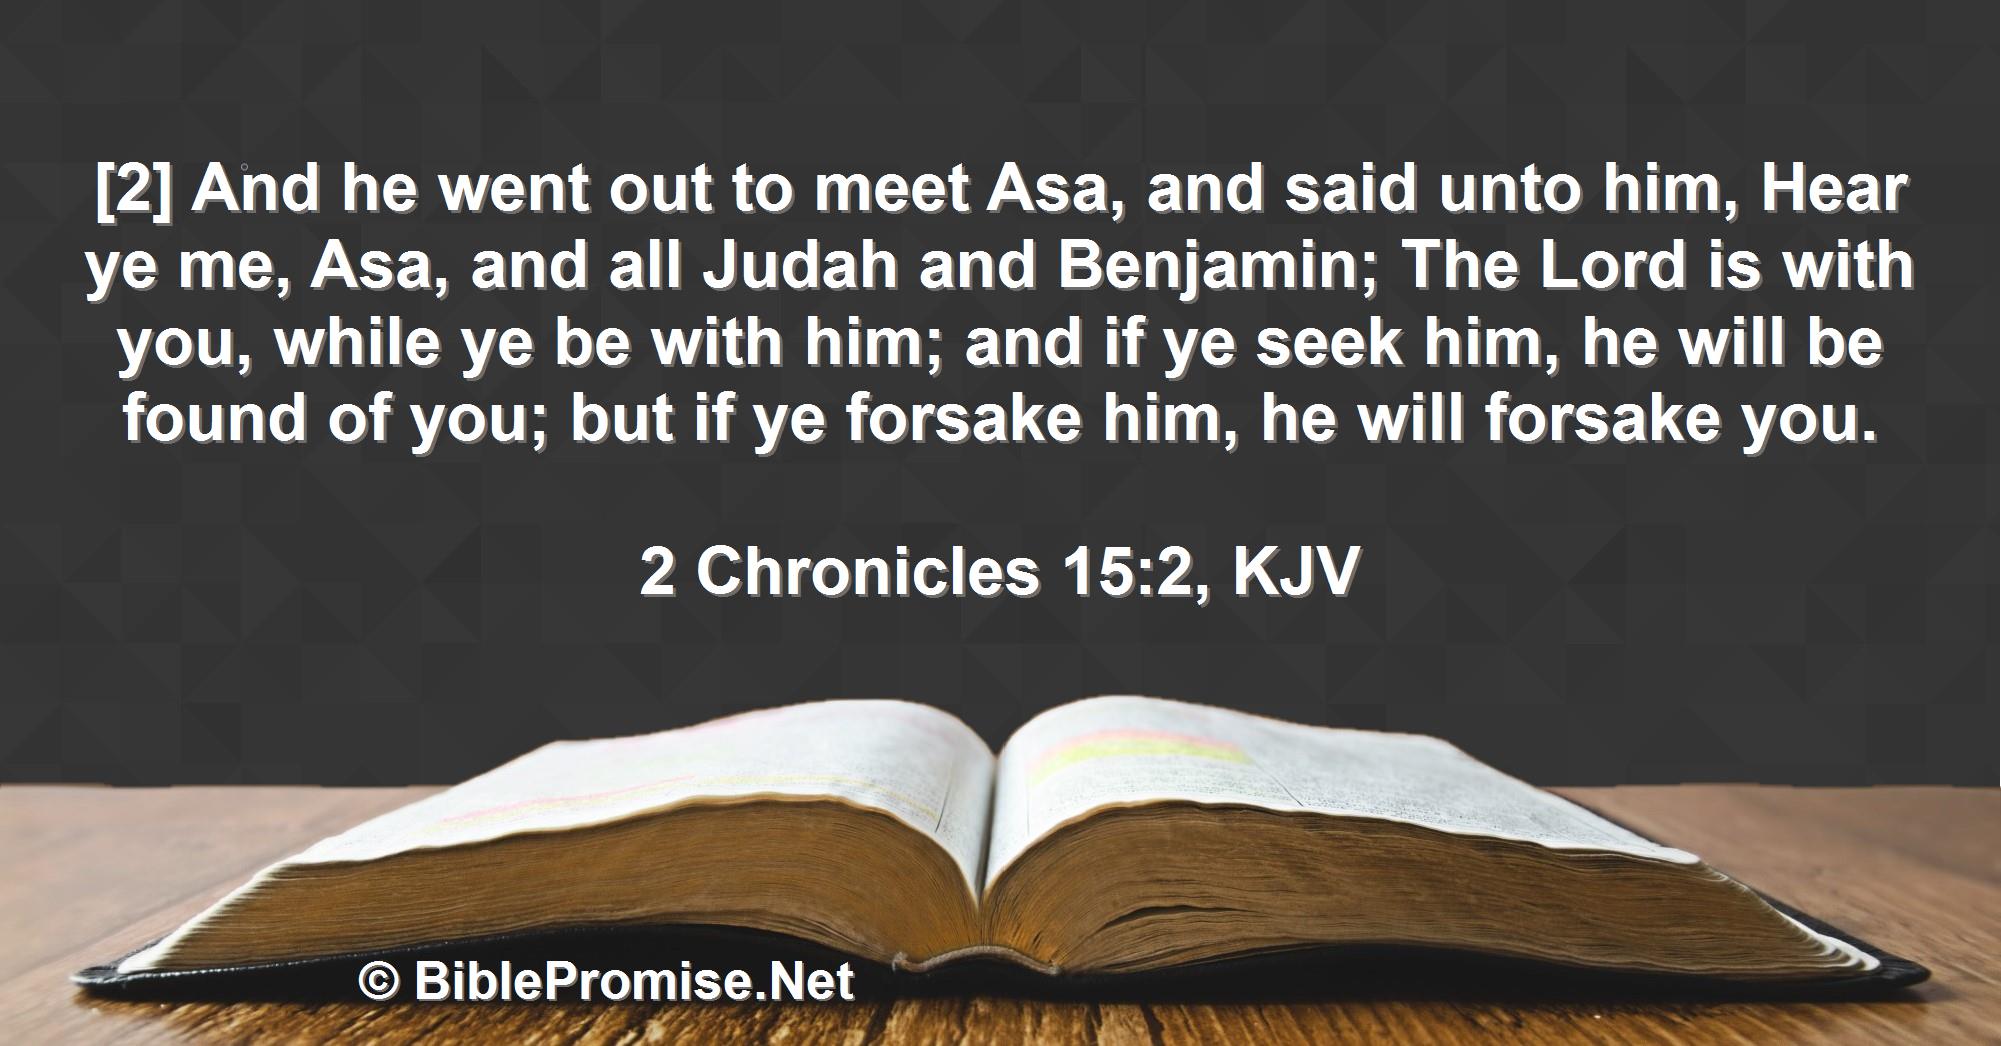 Sunday, June 18, 2023 - 2 Chronicles 15:2 (KJV) - Bible promise that God is with you if you are with him.